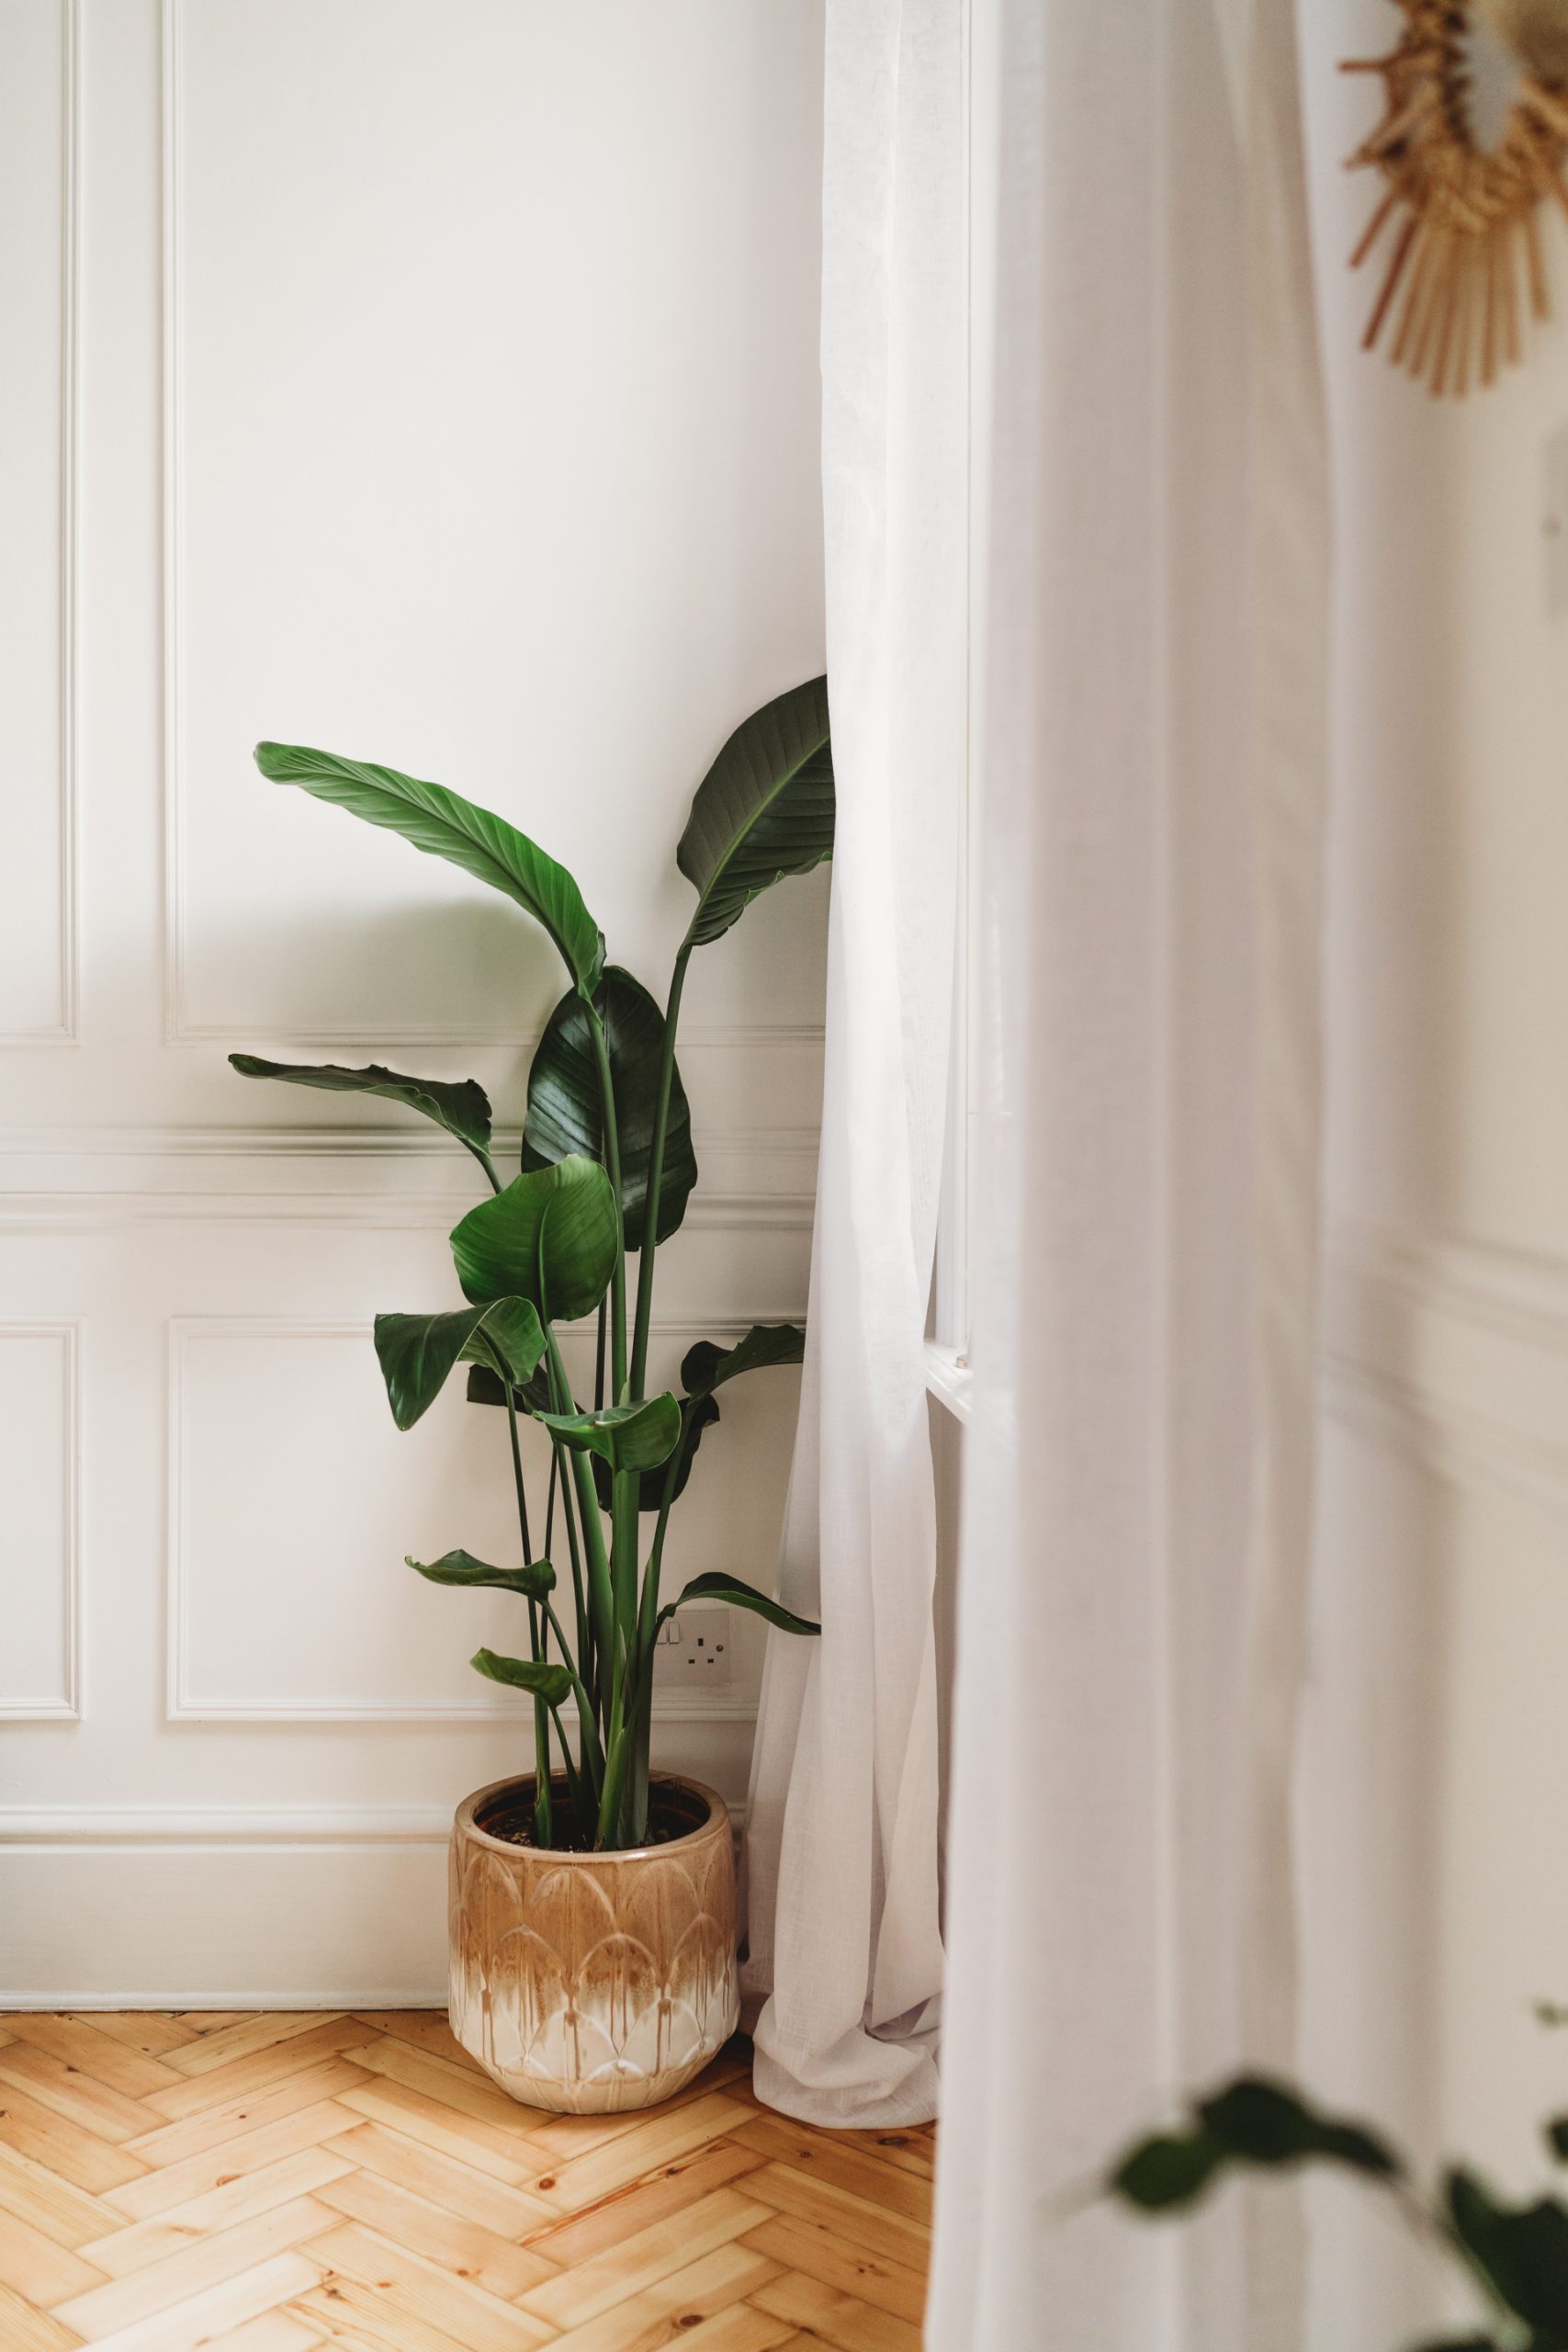 large bird of paradise plant in front of window as light spills onto the wooden parquet floor through white curtains 